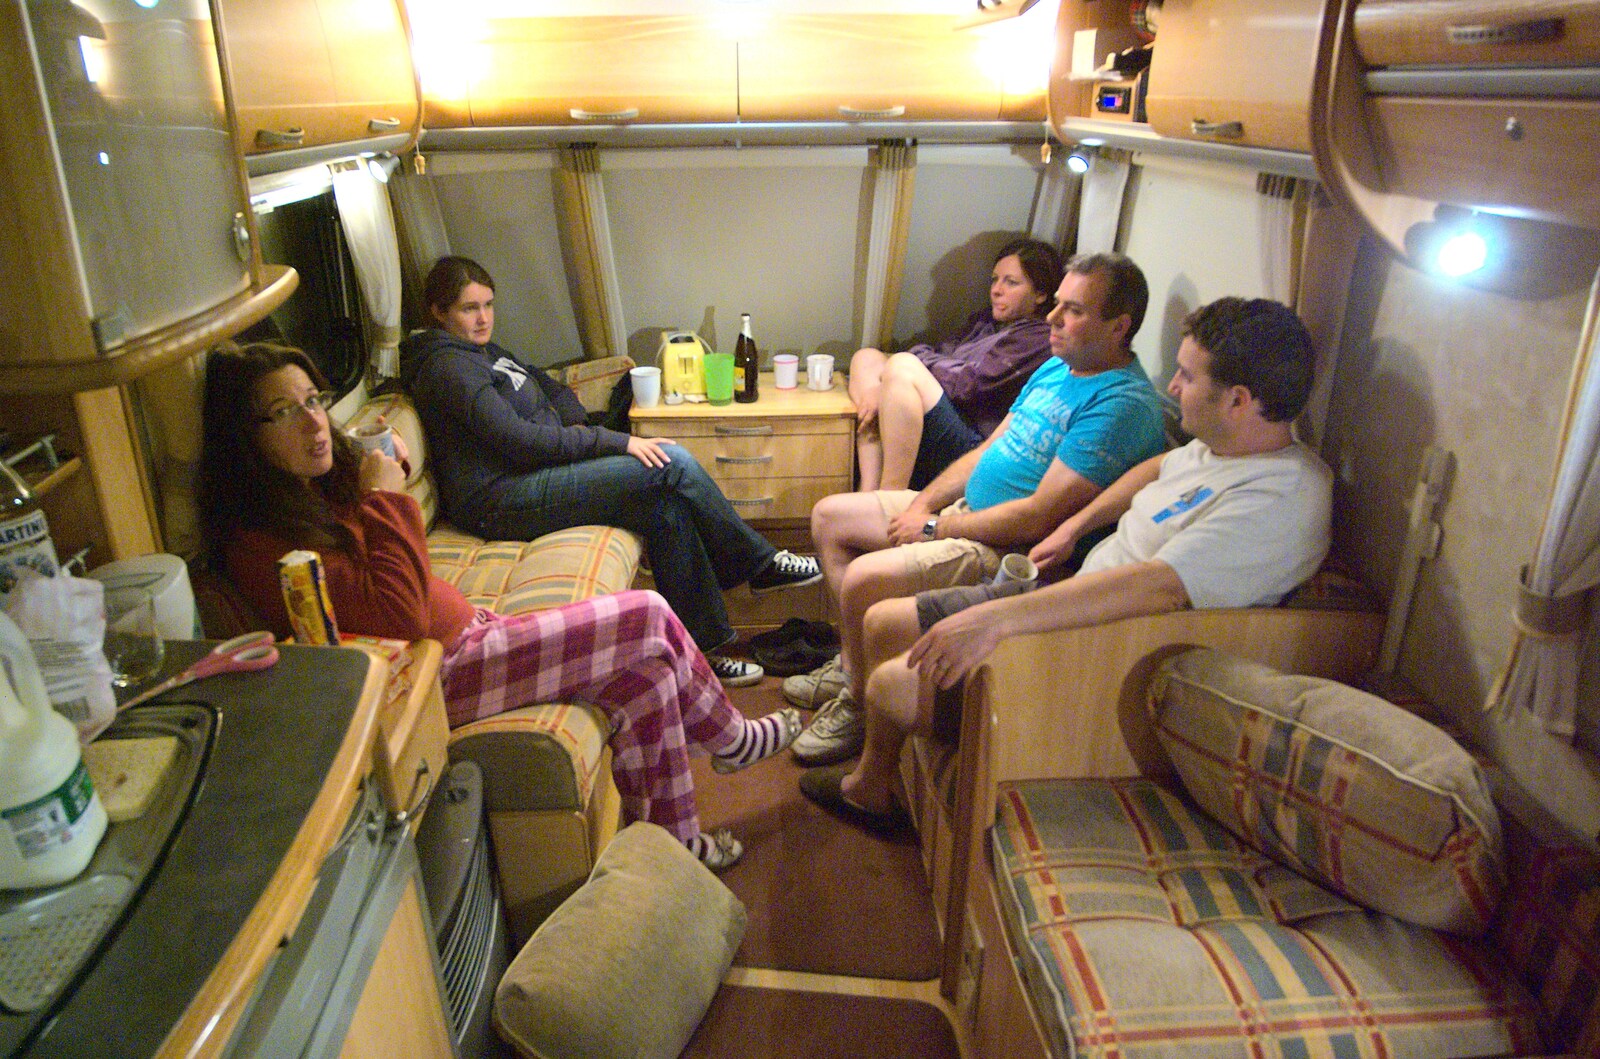 In the caravan from Fred's Birthday and Mildenhall Camping, Suffolk - 25th September 2011